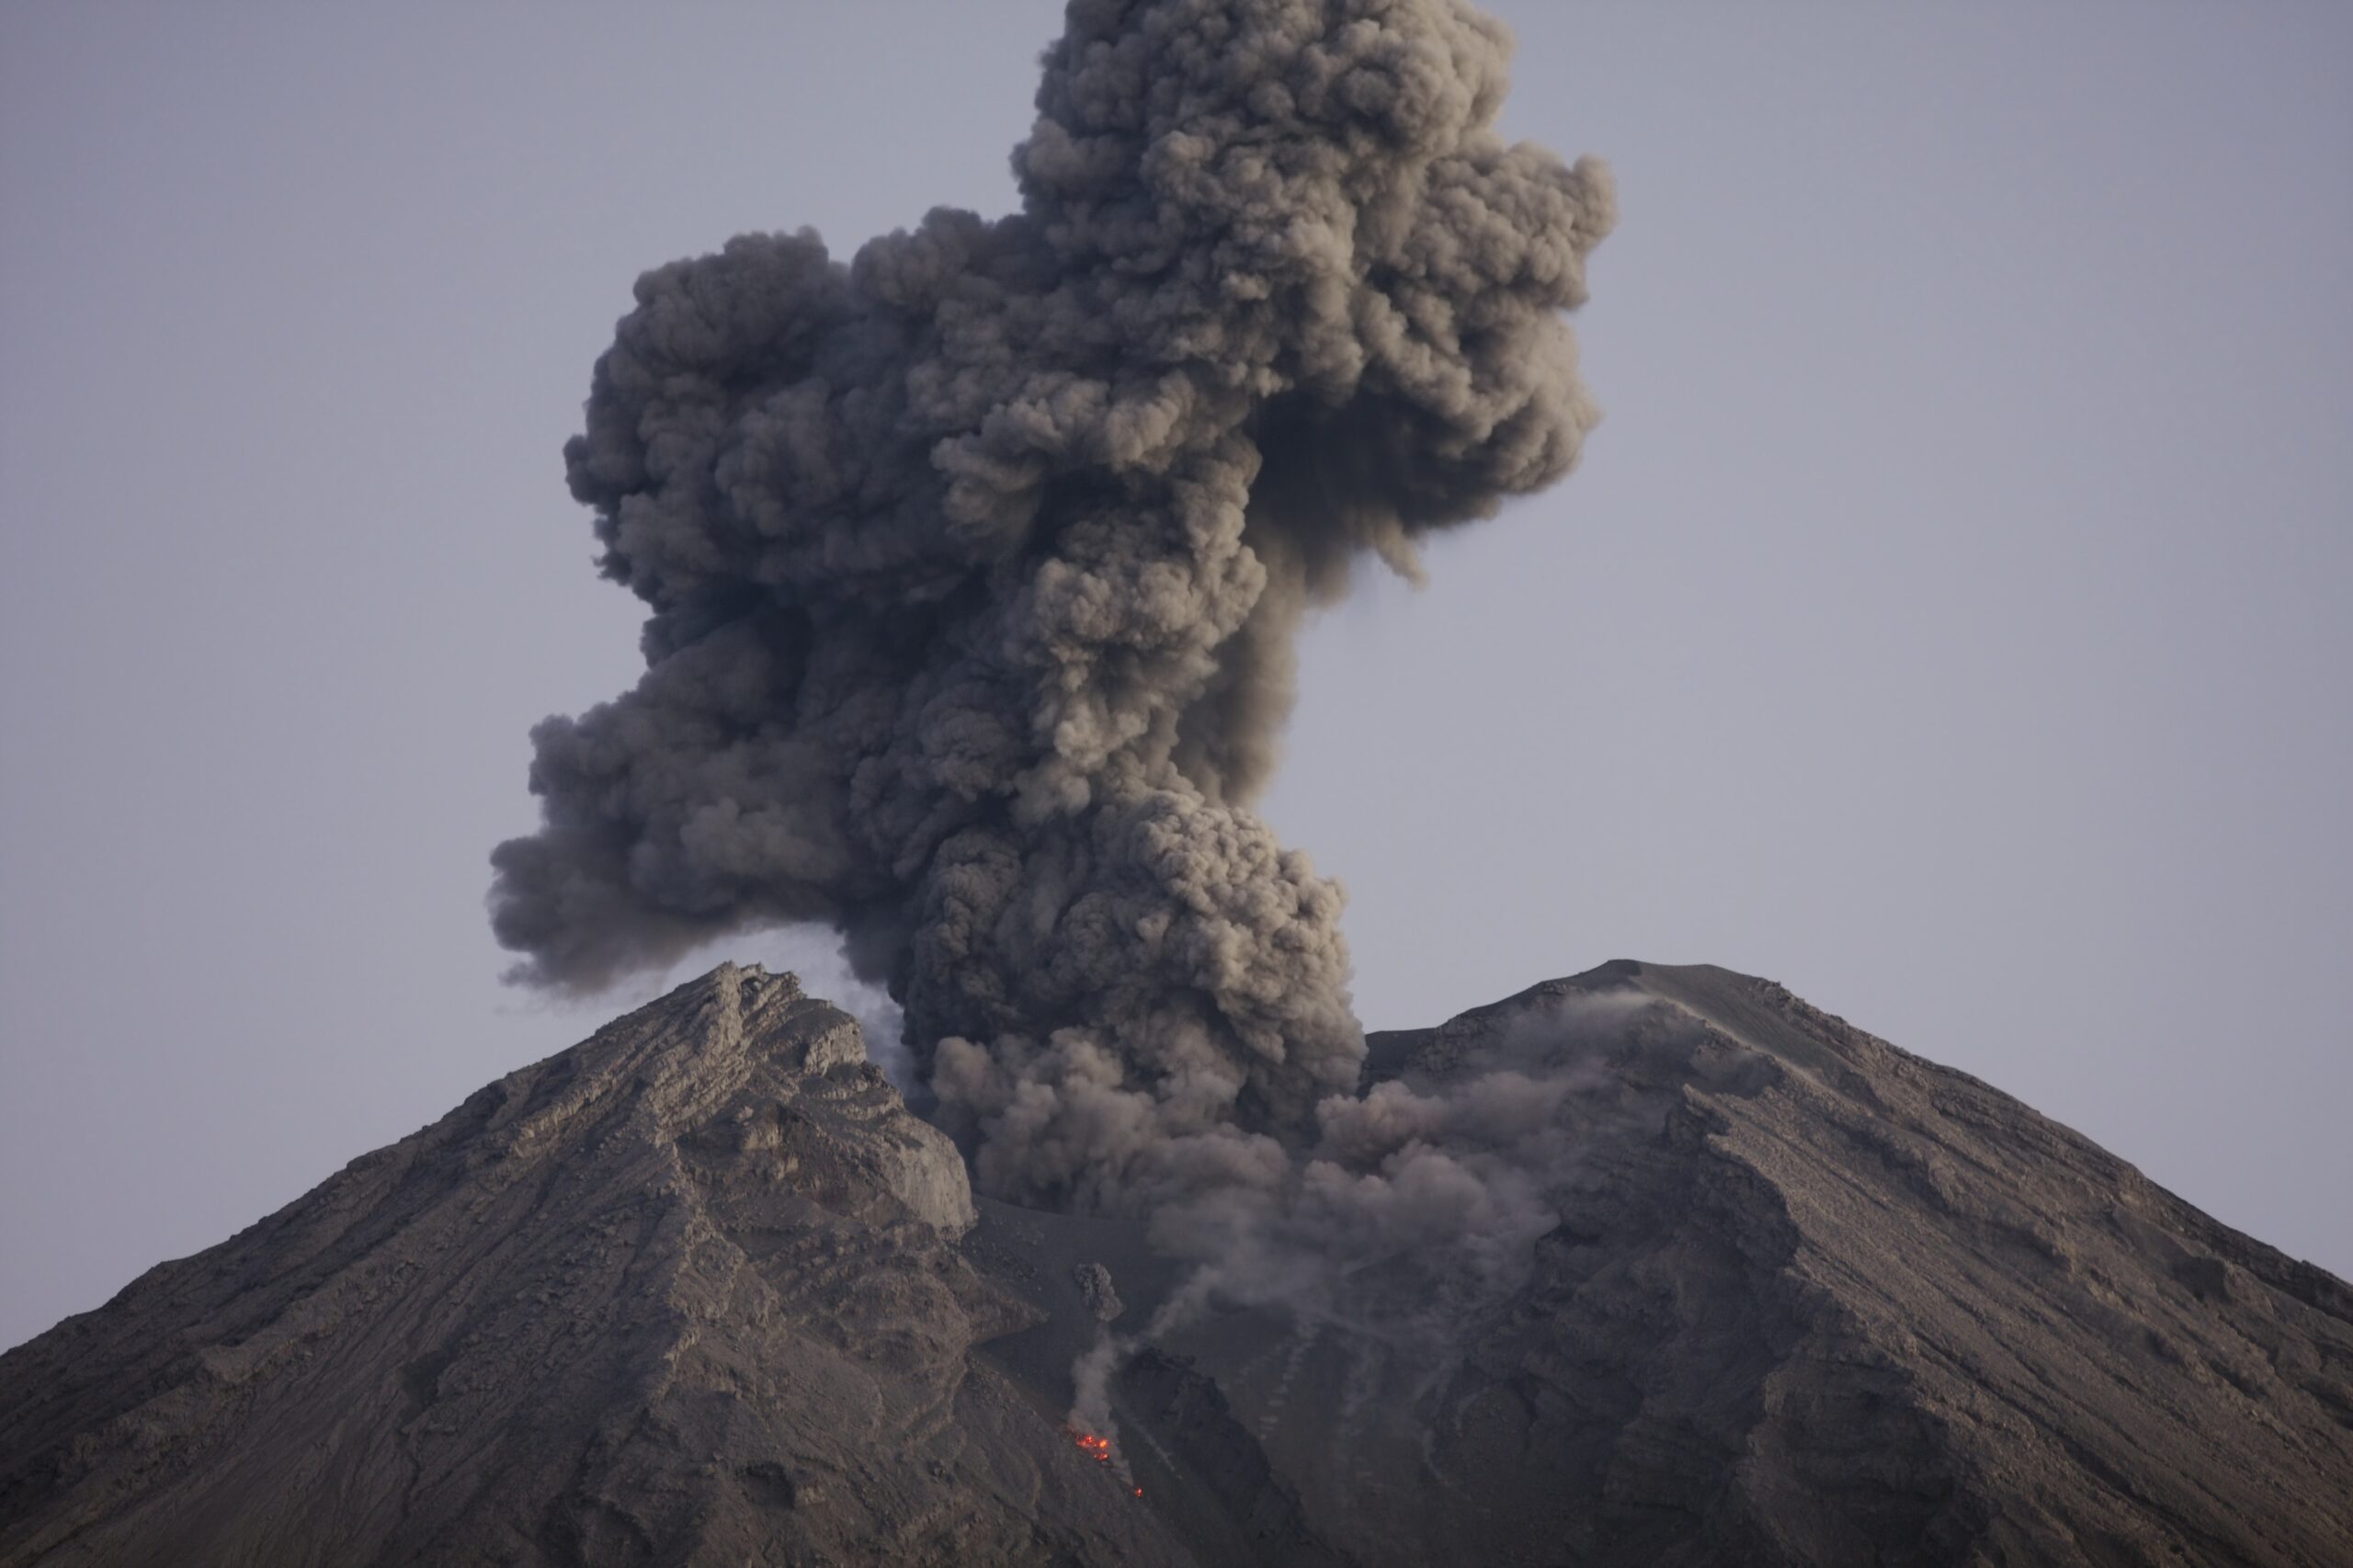 A cloud of deadly volcanic ash spews from a volcano.